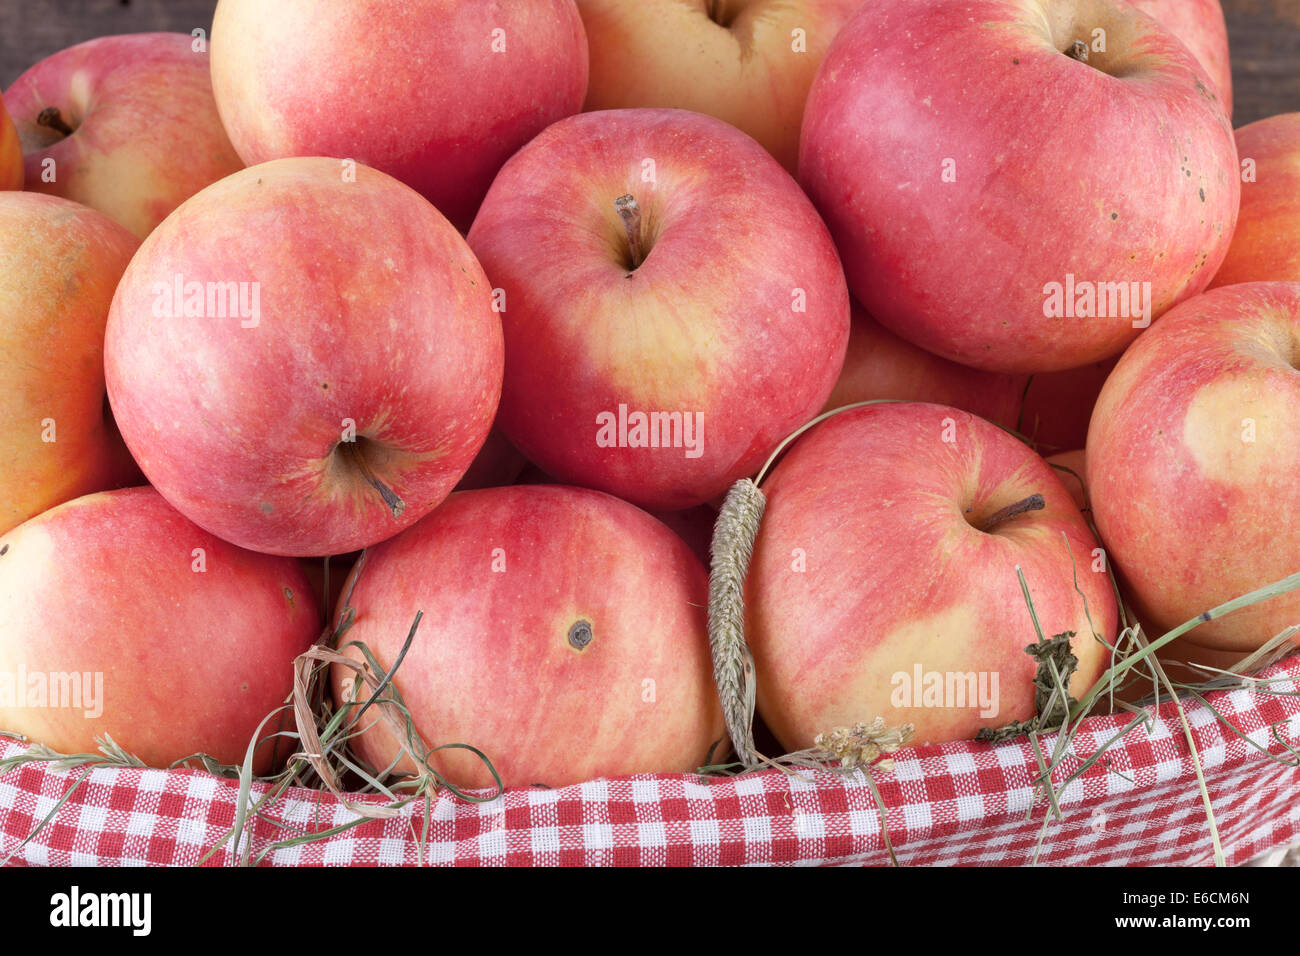 Close-up view of organic red apples in supermarket., Stock image